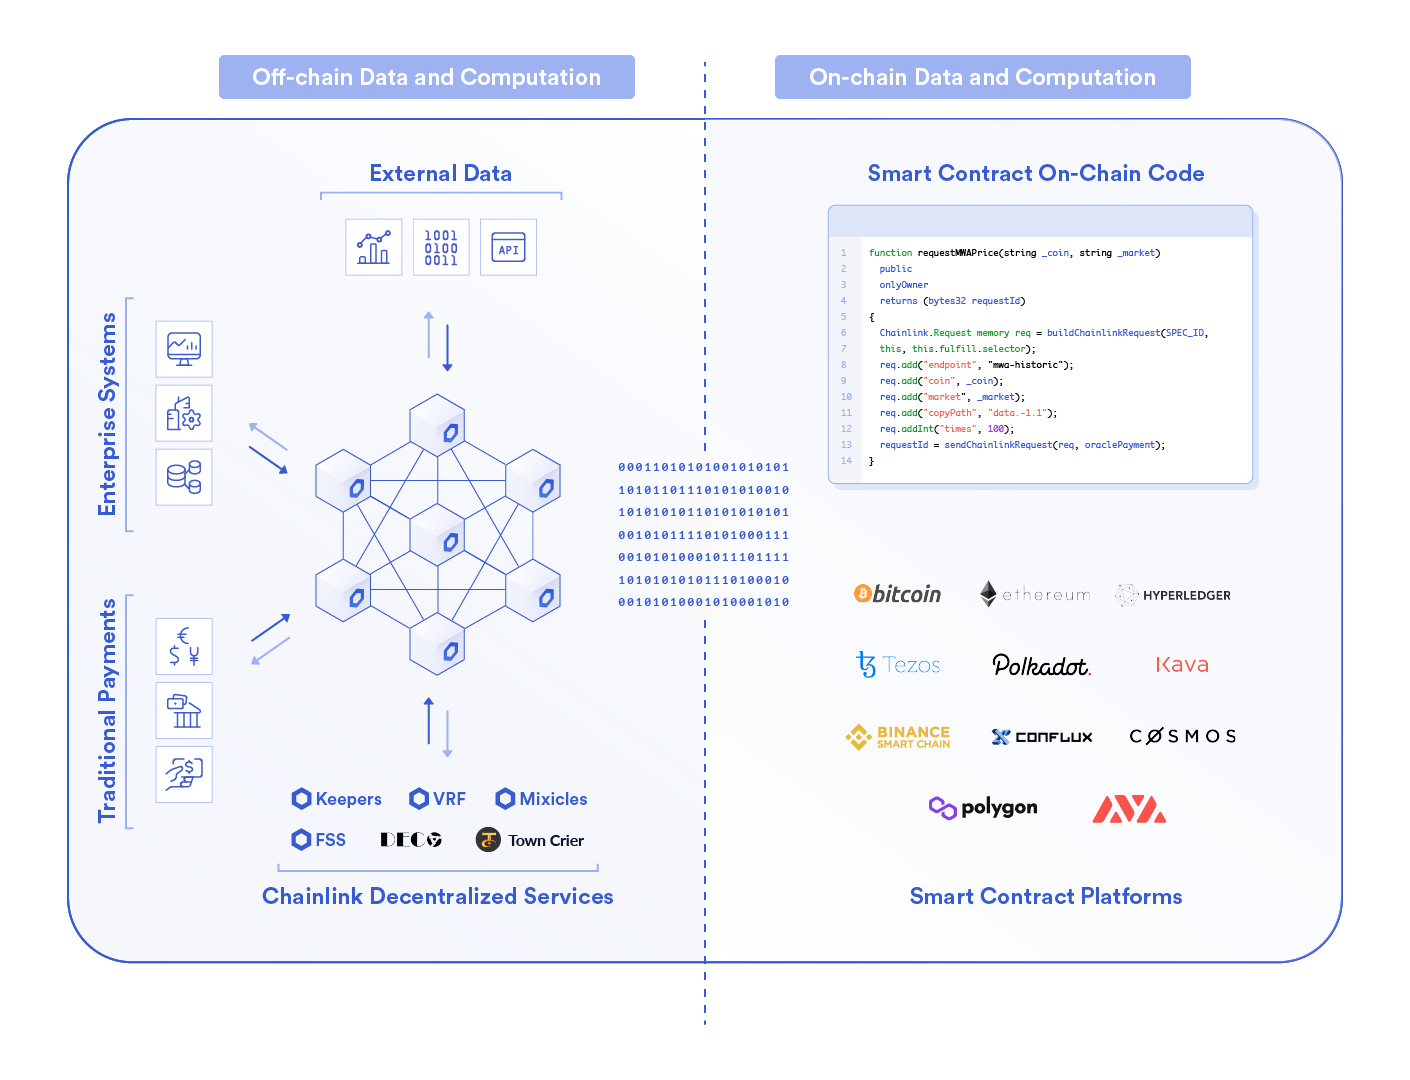 Chainlink Decentralized Oracle Networks provide access to any off-chain data source or computation for smart contract applications.